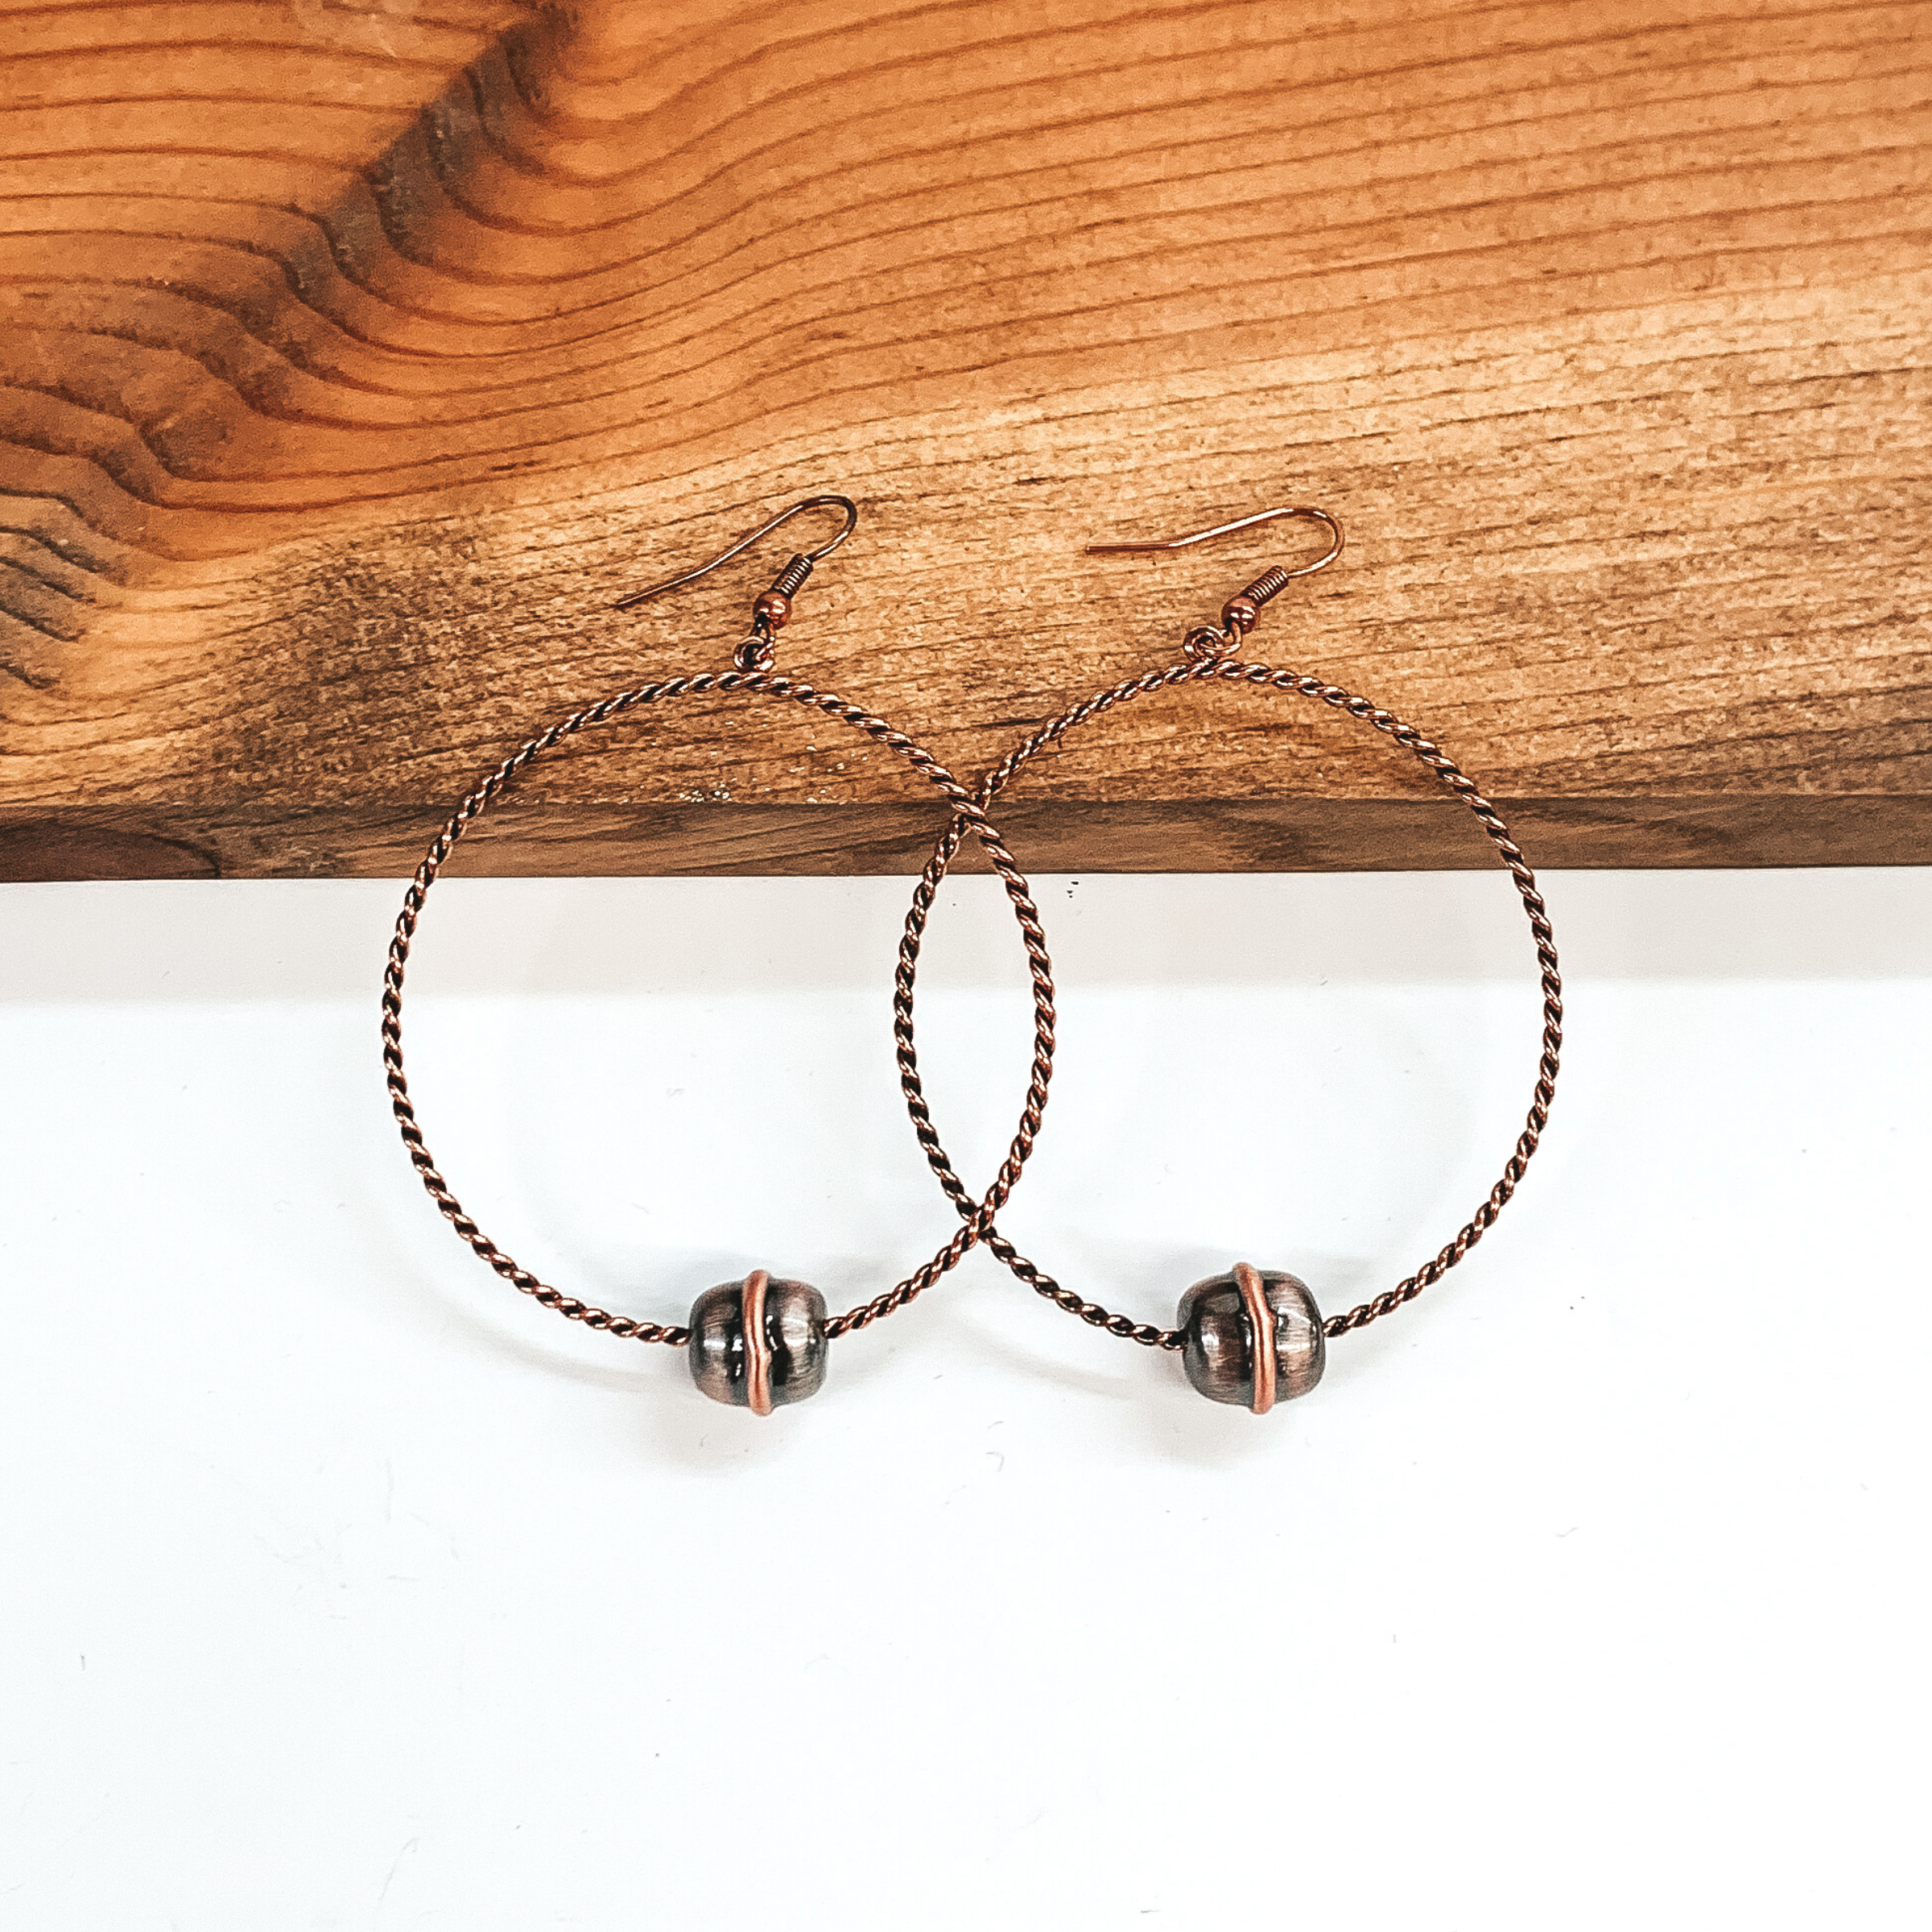 Copper twisted circle drop earrings with a single copper Navajo inspired bead at the bottom. These earrings are pictured laying against a dark piece of wood on a white background.